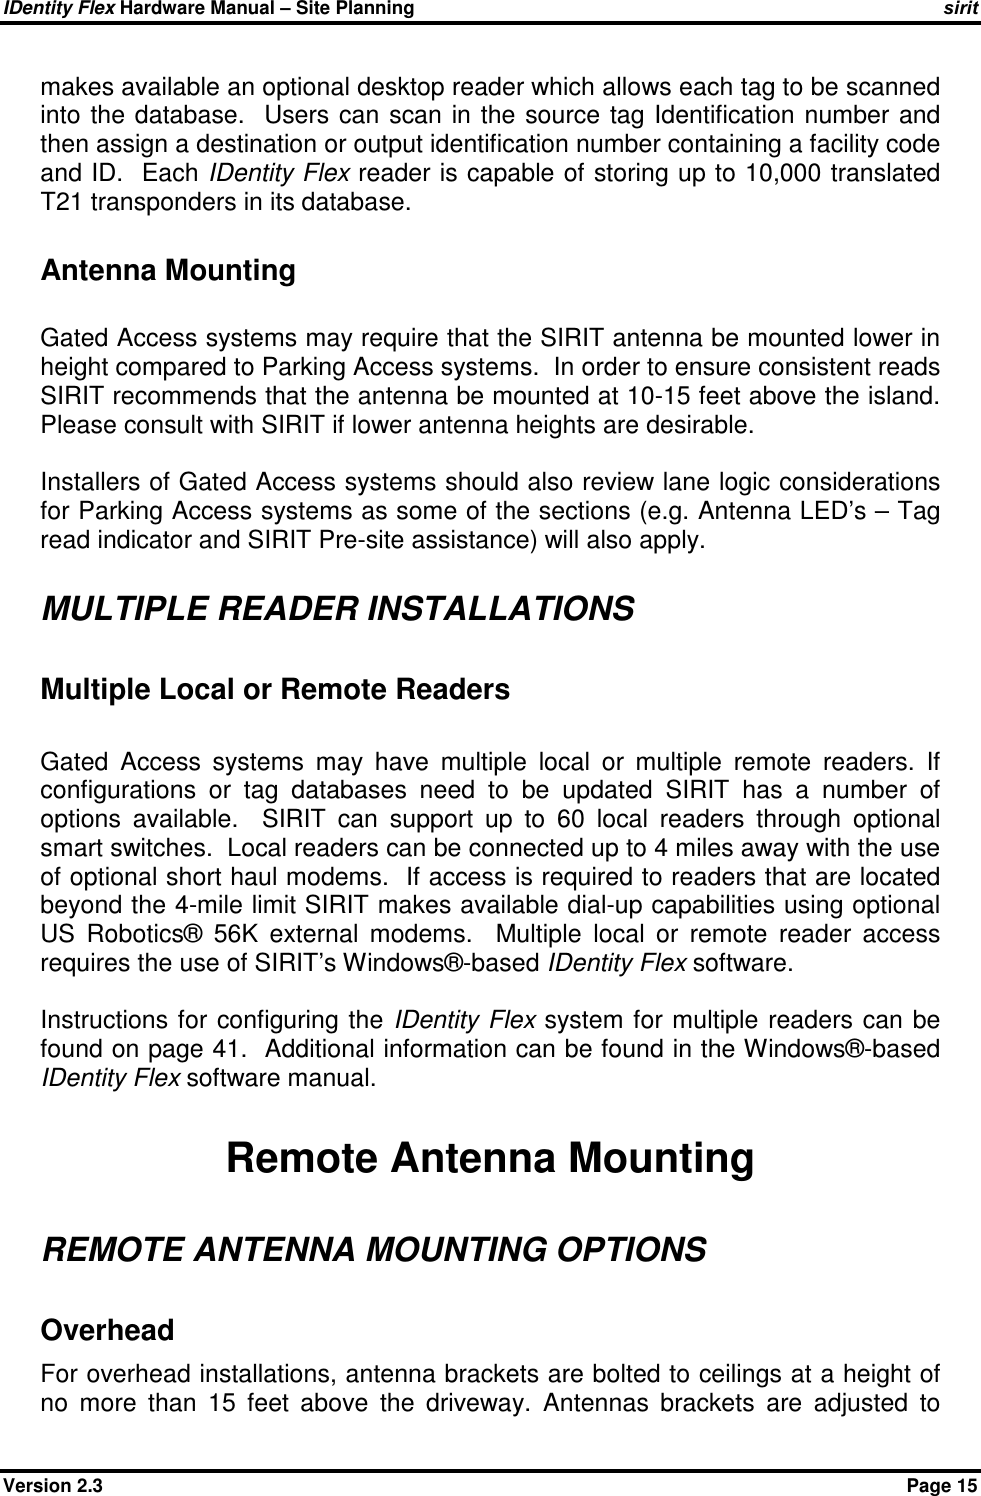 IDentity Flex Hardware Manual – Site Planning    sirit Version 2.3    Page 15 makes available an optional desktop reader which allows each tag to be scanned into  the database.   Users can scan  in the source  tag Identification number  and then assign a destination or output identification number containing a facility code and ID.  Each IDentity Flex reader is capable of storing up to 10,000 translated T21 transponders in its database.  Antenna Mounting  Gated Access systems may require that the SIRIT antenna be mounted lower in height compared to Parking Access systems.  In order to ensure consistent reads SIRIT recommends that the antenna be mounted at 10-15 feet above the island.  Please consult with SIRIT if lower antenna heights are desirable.     Installers of Gated Access systems should also review lane logic considerations for Parking Access systems as some of the sections (e.g. Antenna LED’s – Tag read indicator and SIRIT Pre-site assistance) will also apply.   MULTIPLE READER INSTALLATIONS Multiple Local or Remote Readers  Gated  Access  systems  may  have  multiple  local  or  multiple  remote  readers.  If configurations  or  tag  databases  need  to  be  updated  SIRIT  has  a  number  of options  available.    SIRIT  can  support  up  to  60  local  readers  through  optional smart switches.  Local readers can be connected up to 4 miles away with the use of optional short haul modems.  If access is required to readers that are located beyond the 4-mile limit SIRIT makes available dial-up capabilities using optional US  Robotics®  56K  external  modems.    Multiple  local  or  remote  reader  access requires the use of SIRIT’s Windows®-based IDentity Flex software.  Instructions for  configuring the IDentity  Flex system for multiple readers can  be found on page 41.  Additional information can be found in the Windows®-based IDentity Flex software manual.  Remote Antenna Mounting REMOTE ANTENNA MOUNTING OPTIONS Overhead For overhead installations, antenna brackets are bolted to ceilings at a height of no  more  than  15  feet  above  the  driveway.  Antennas  brackets  are  adjusted  to 